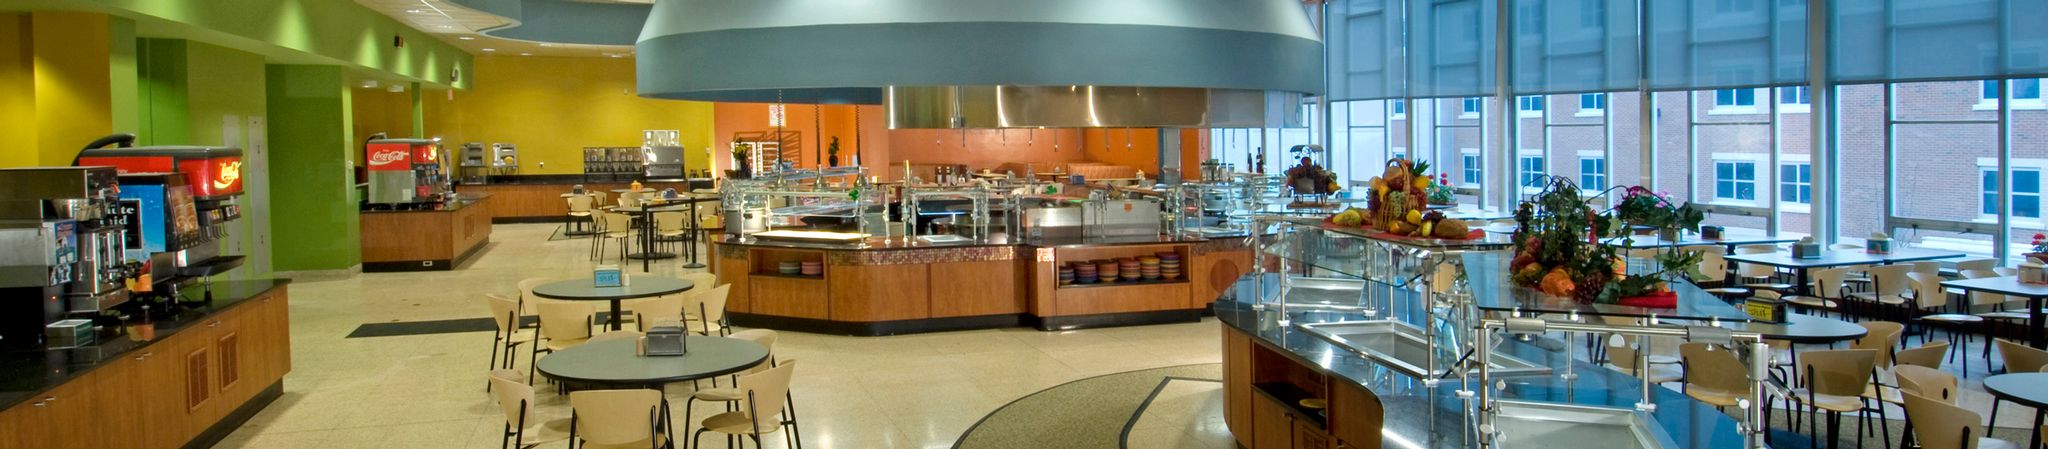 Unlimited access dining facility.